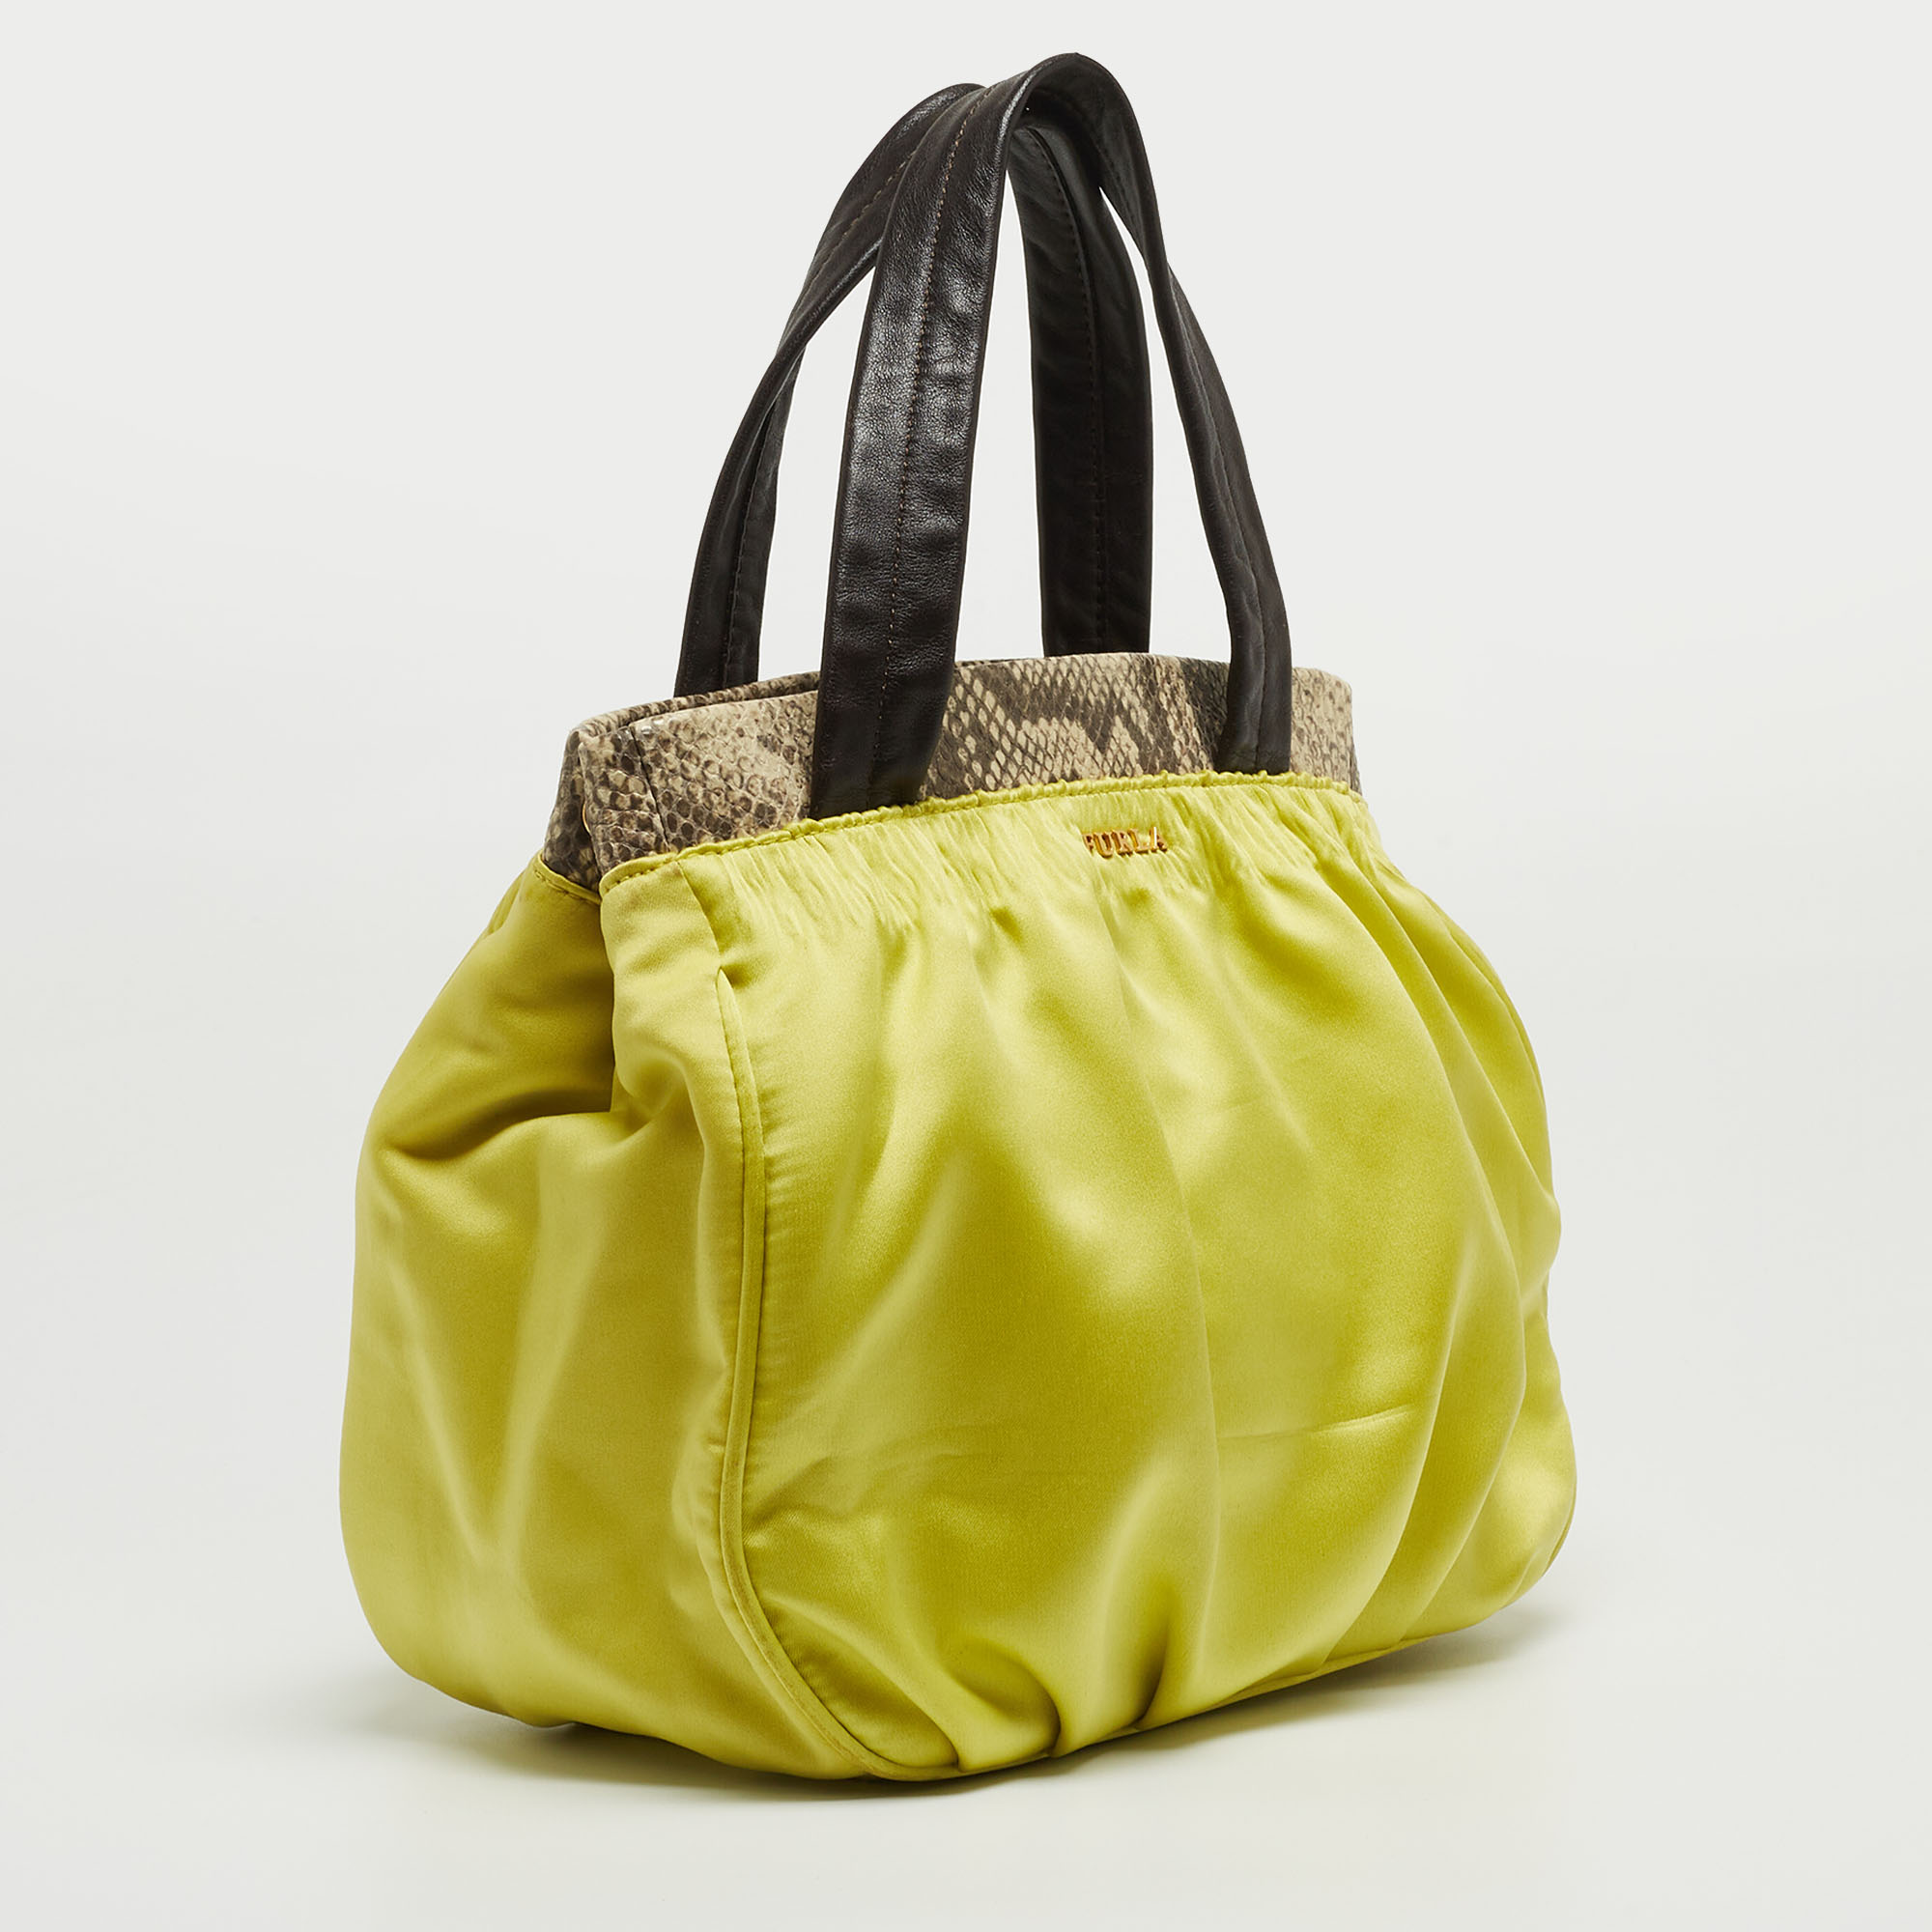 Furla Neon Yellow/Brown Satin And Snakeskin Embossed Leather Tote